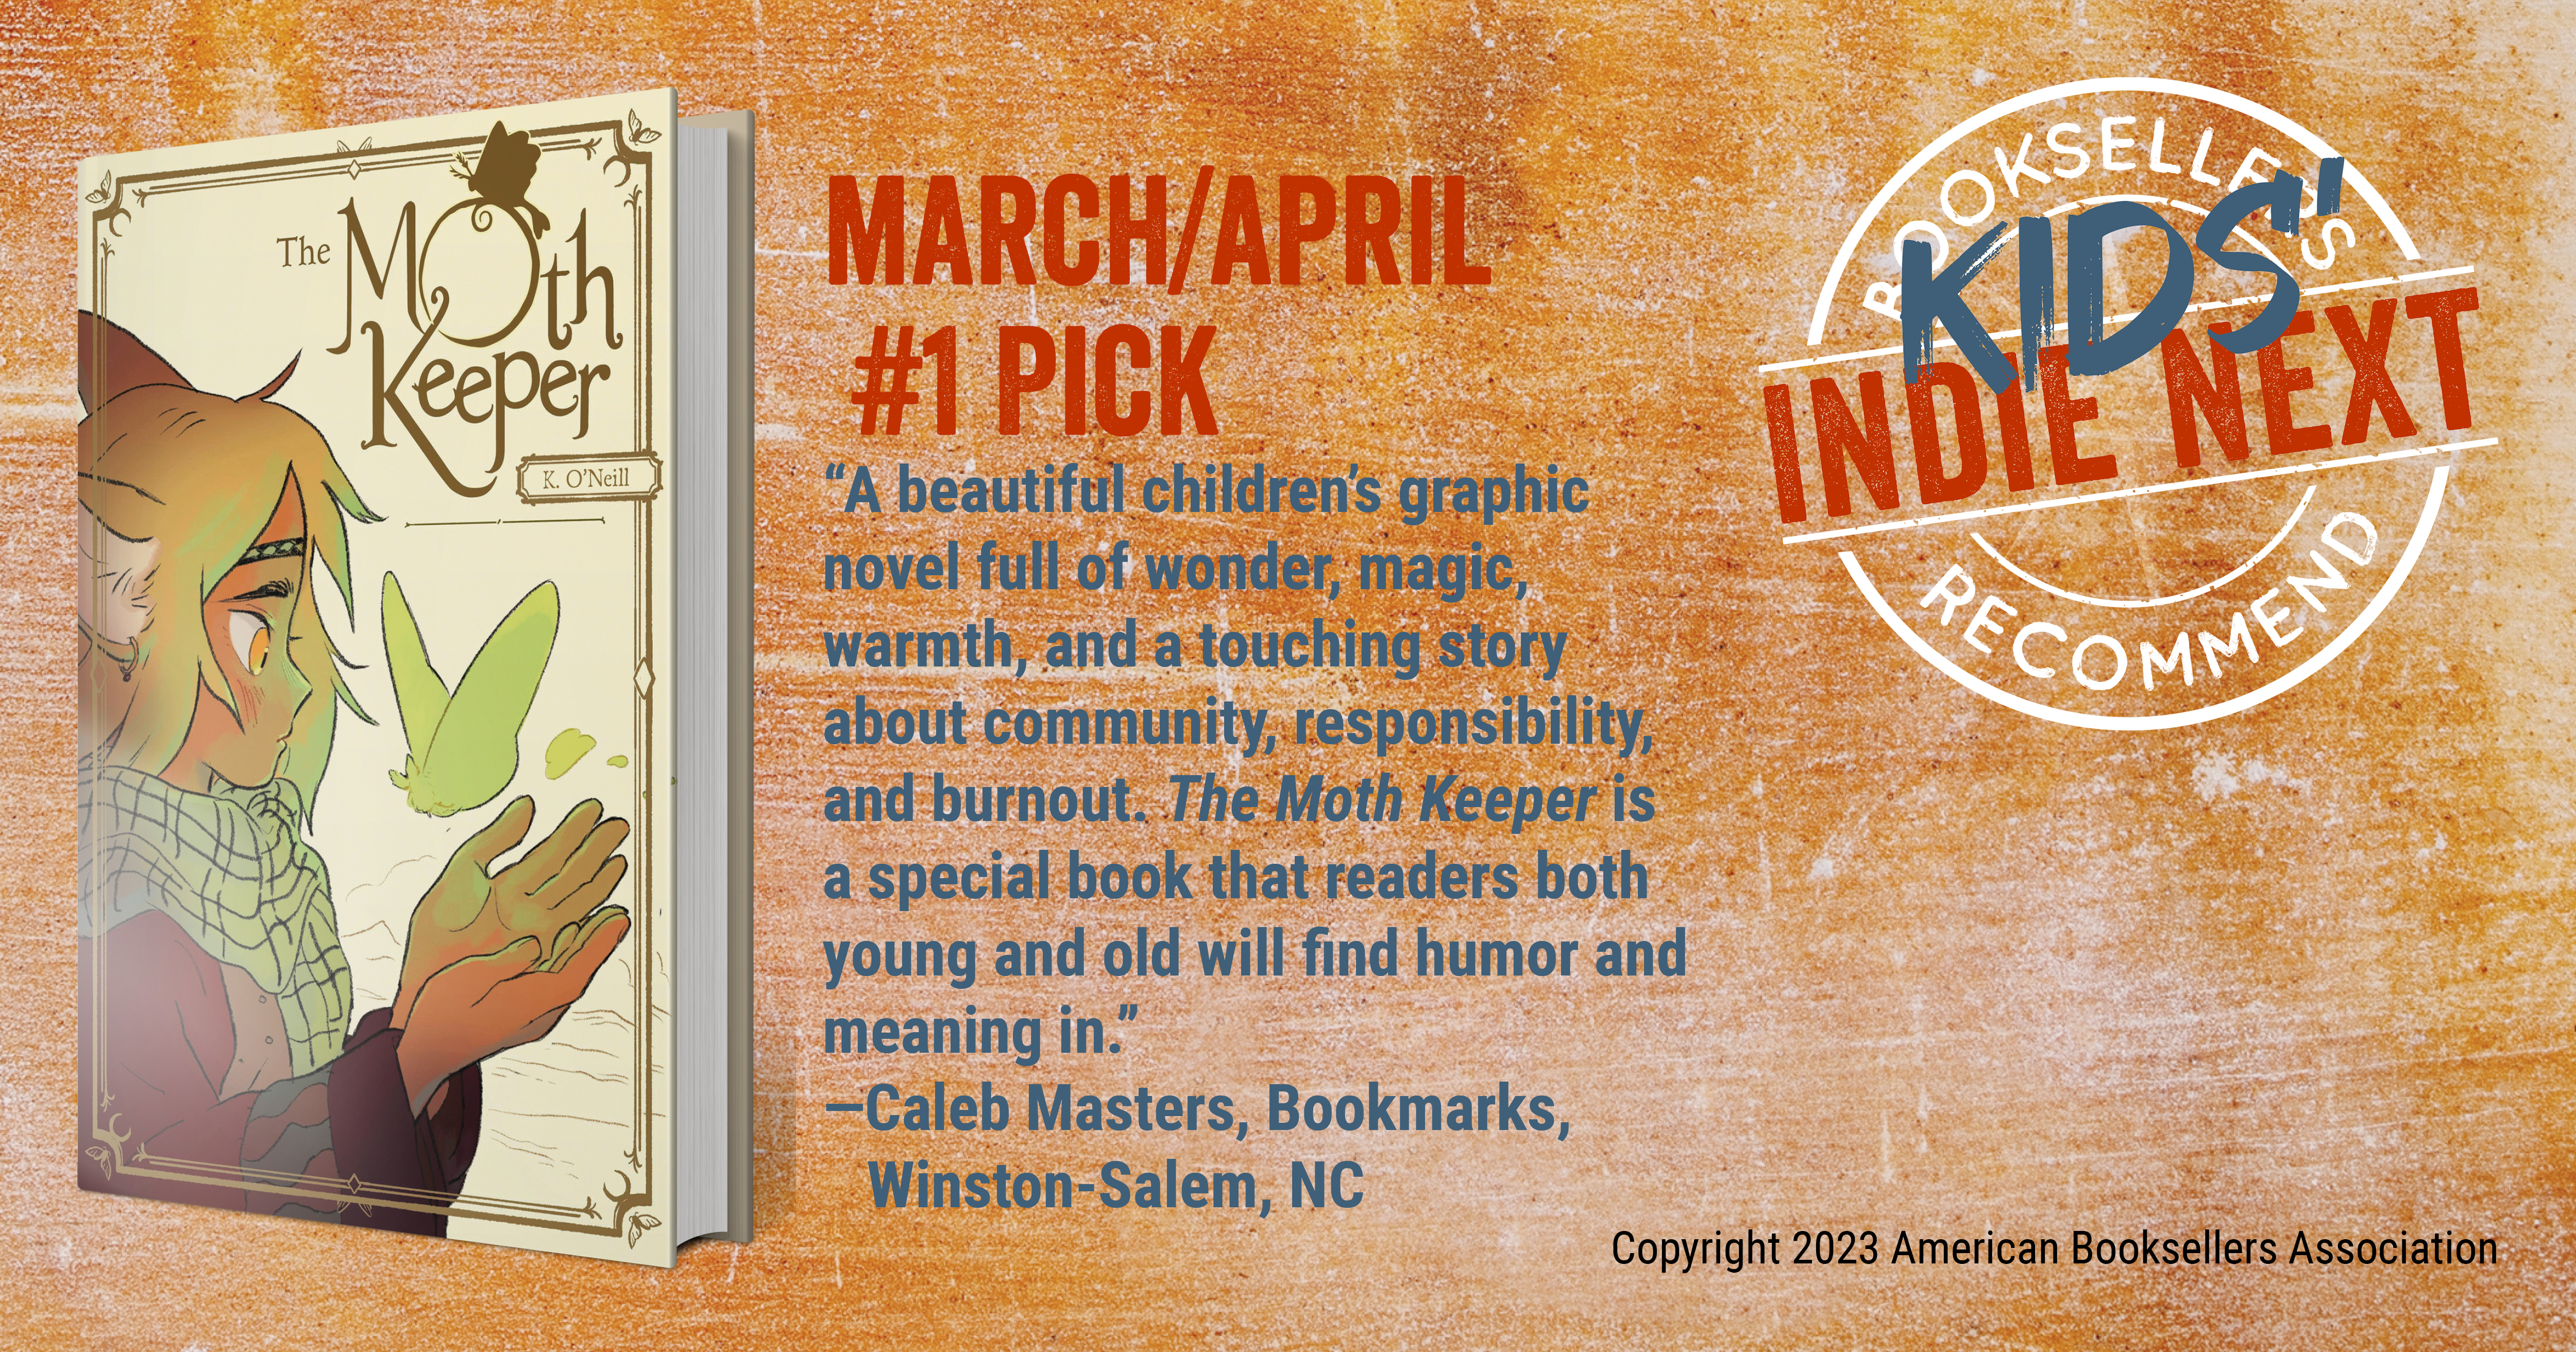 The Moth Keeper is the March Kid's Indie Next # 1 Choice